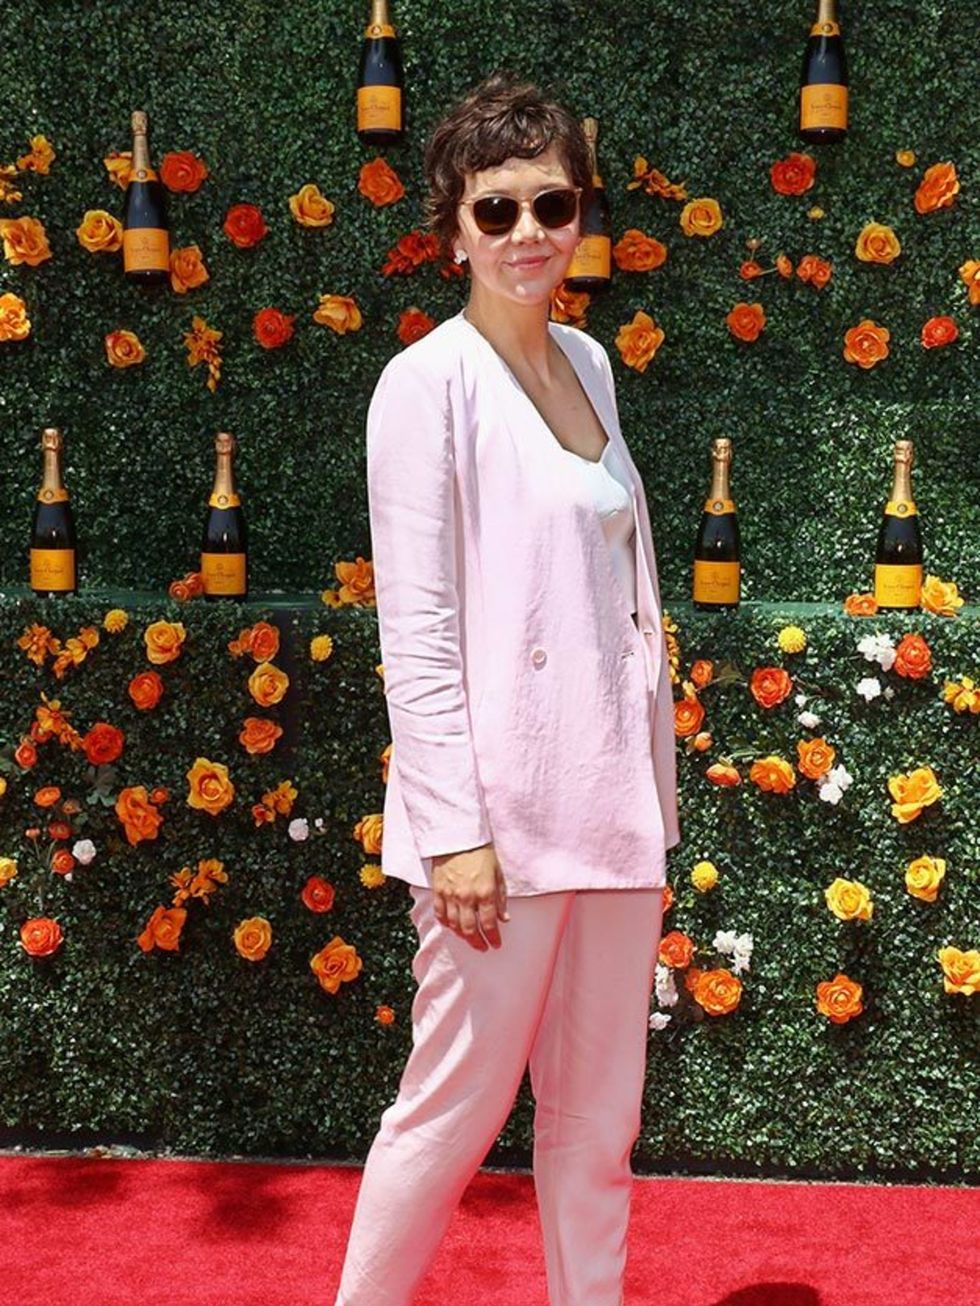 Maggie Gyllenhaal attends the Veuve Clicquot Polo Classic at Liberty State Park, May 2015.